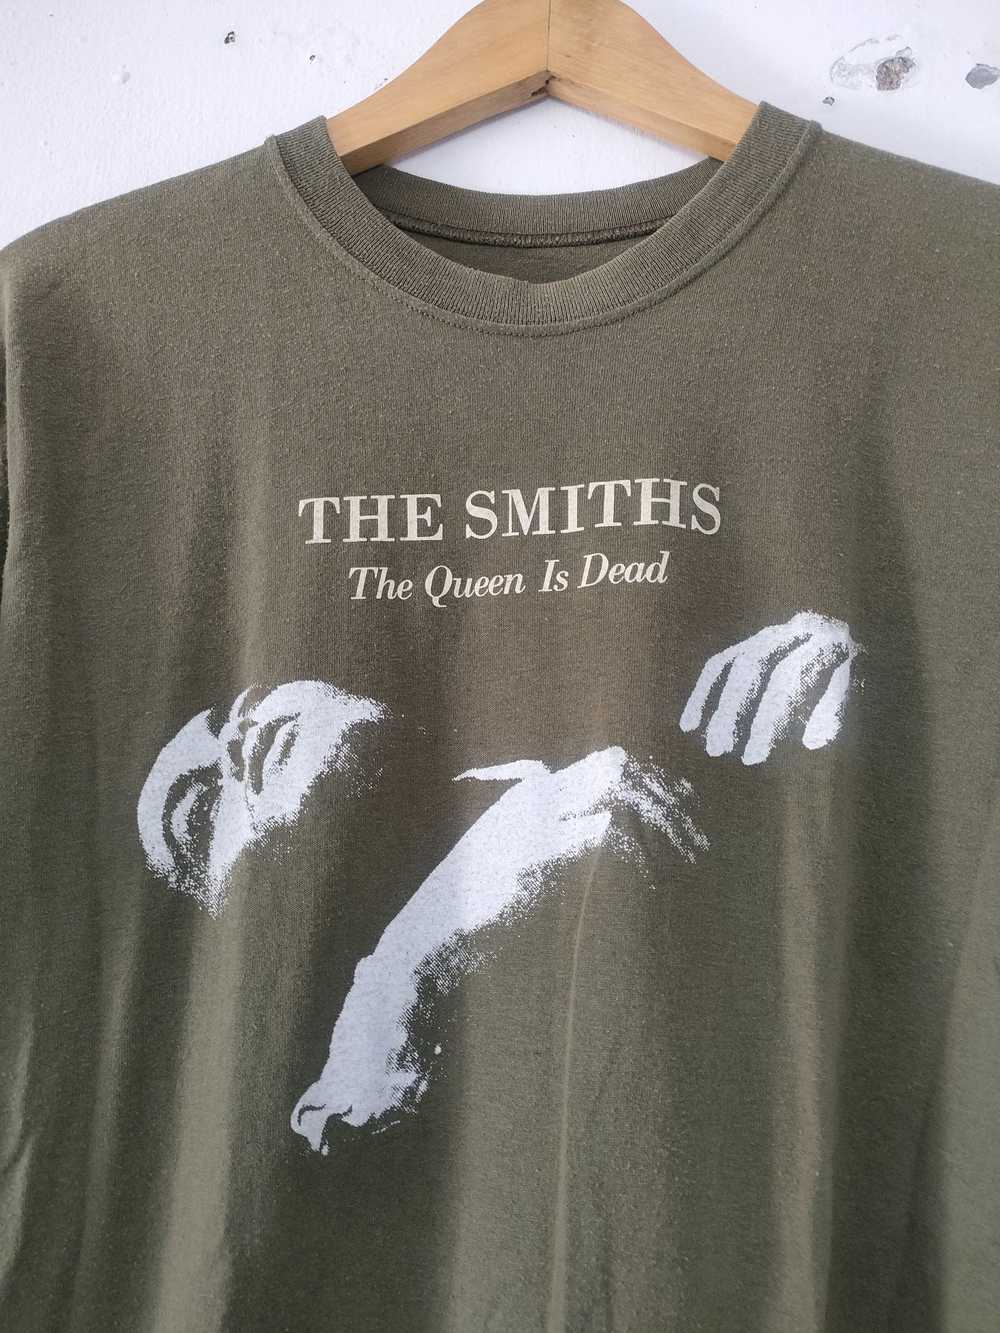 Band Tees × Morrissey × The Smiths THE SMITHS 'TH… - image 8